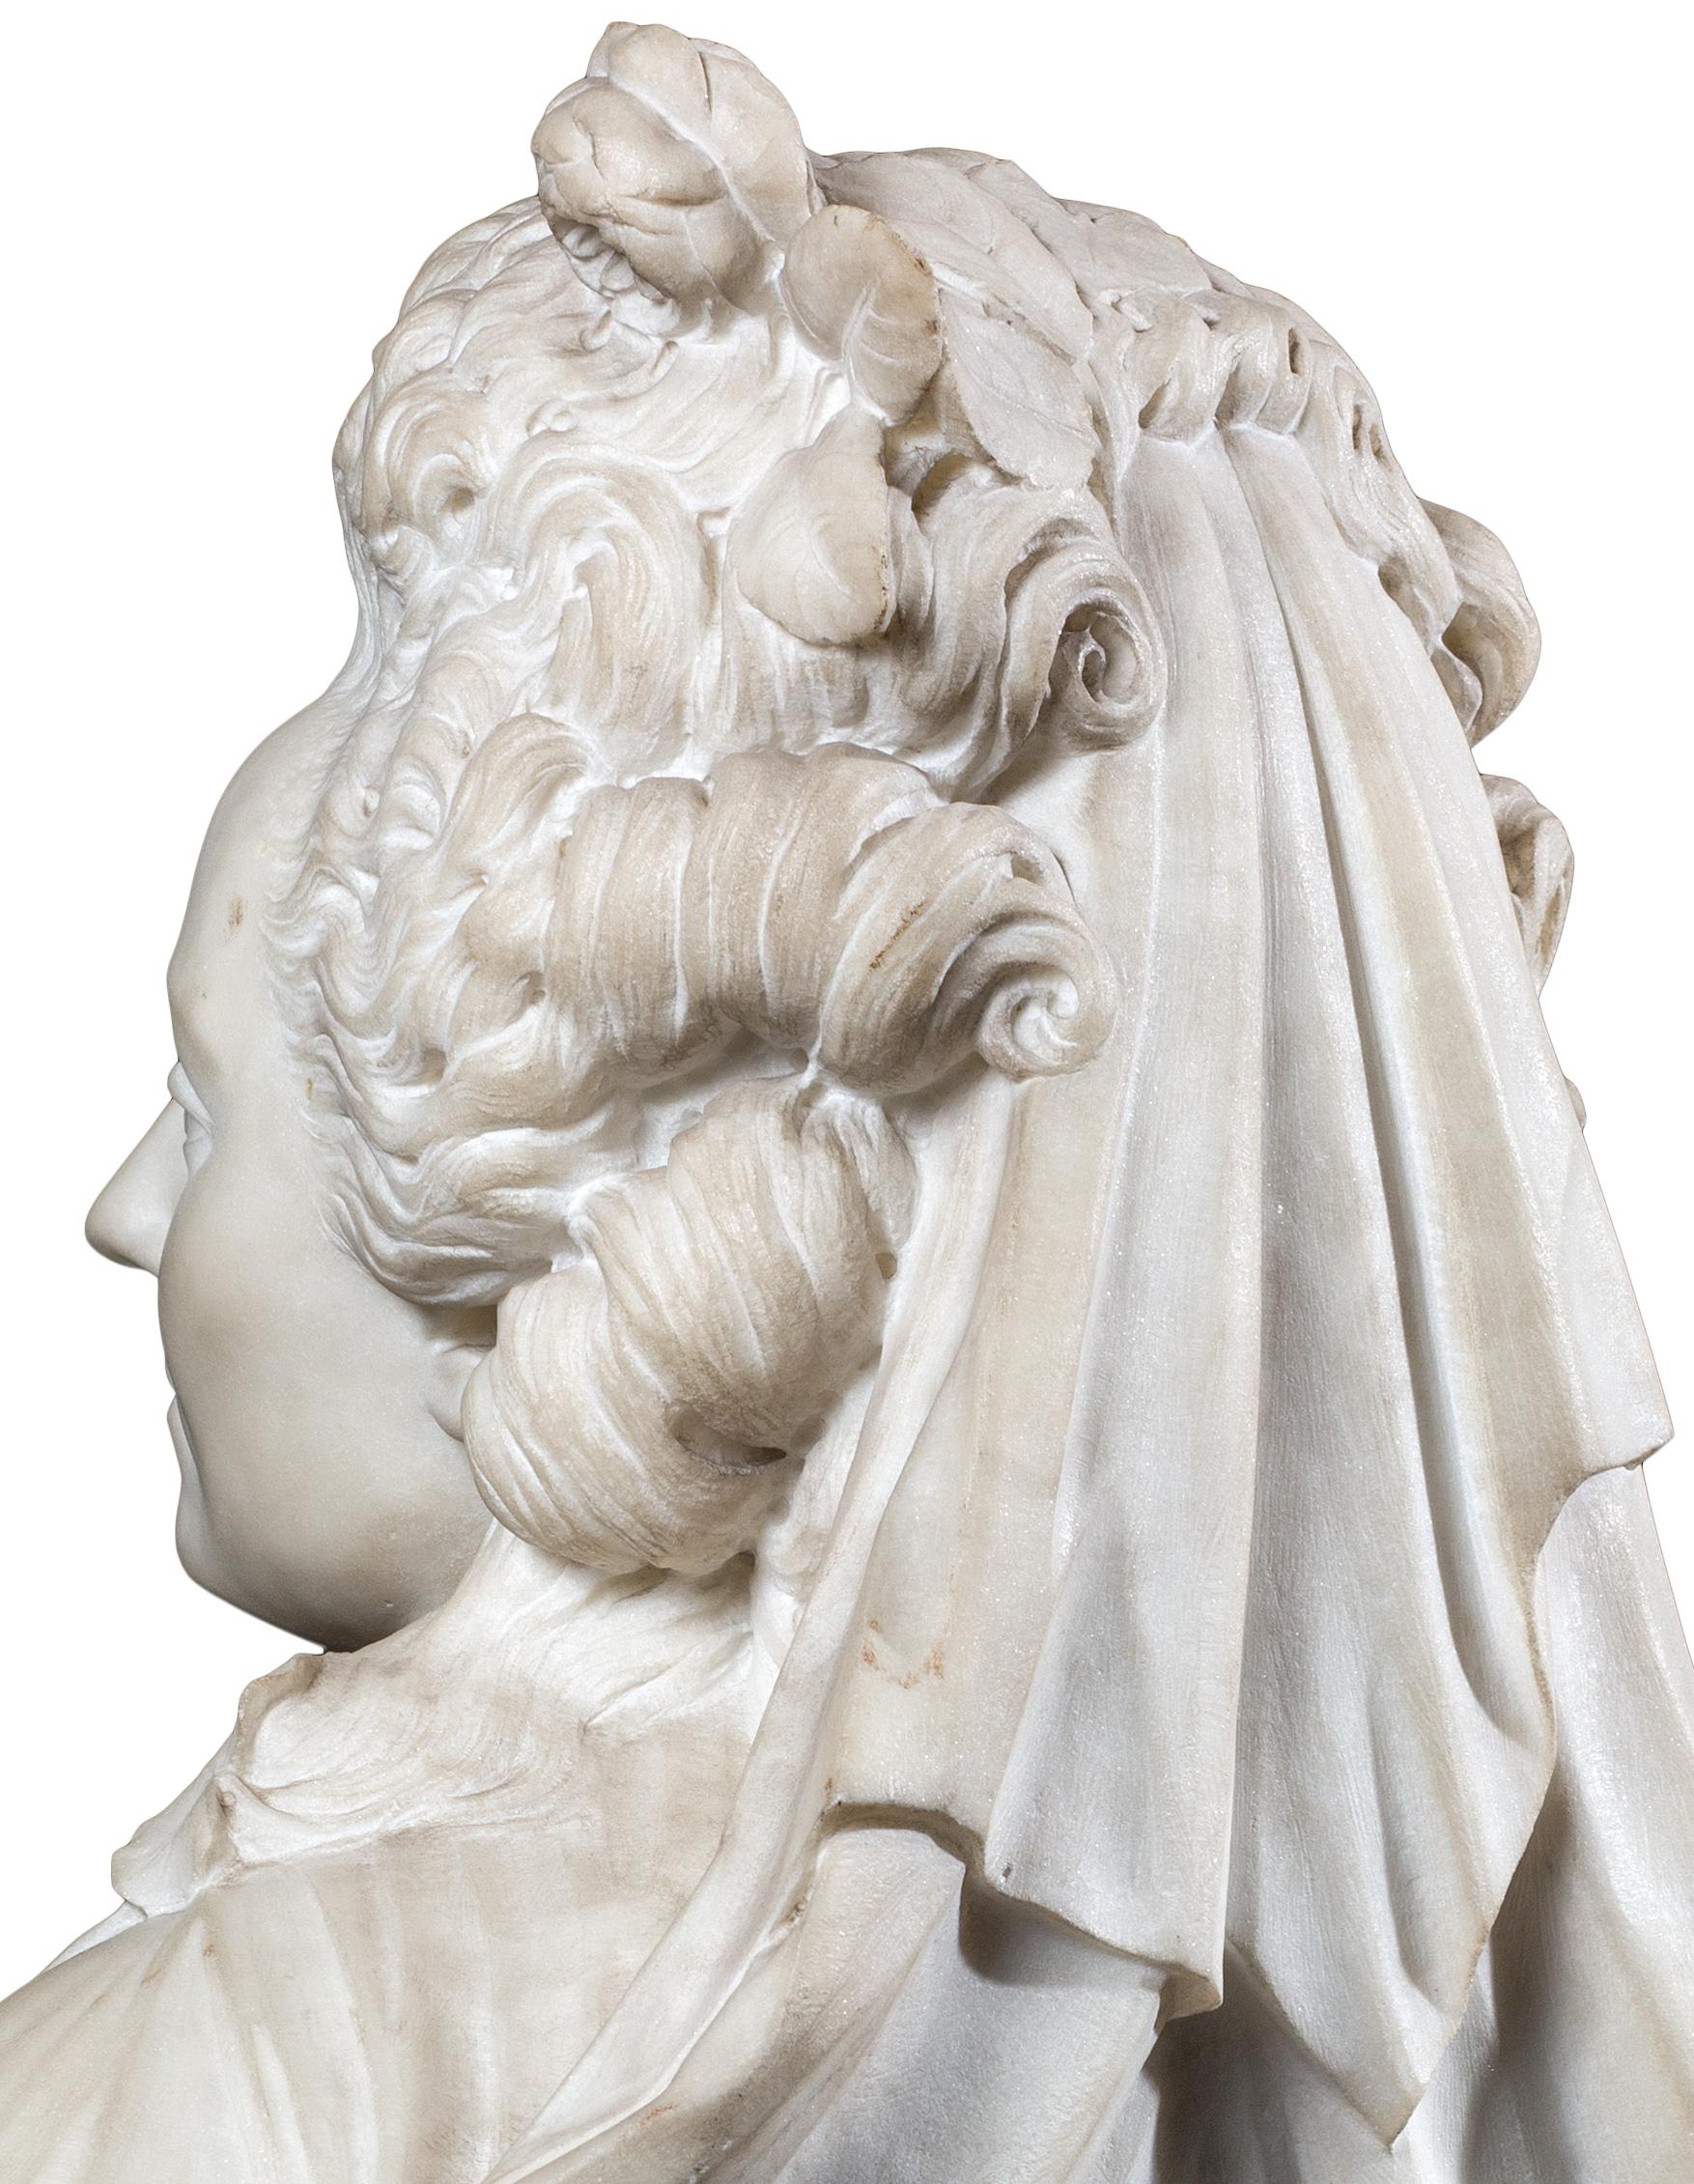 18th Century French Marble Sculpture Bust of Dancer Marie-Madeleine Guimard For Sale 1